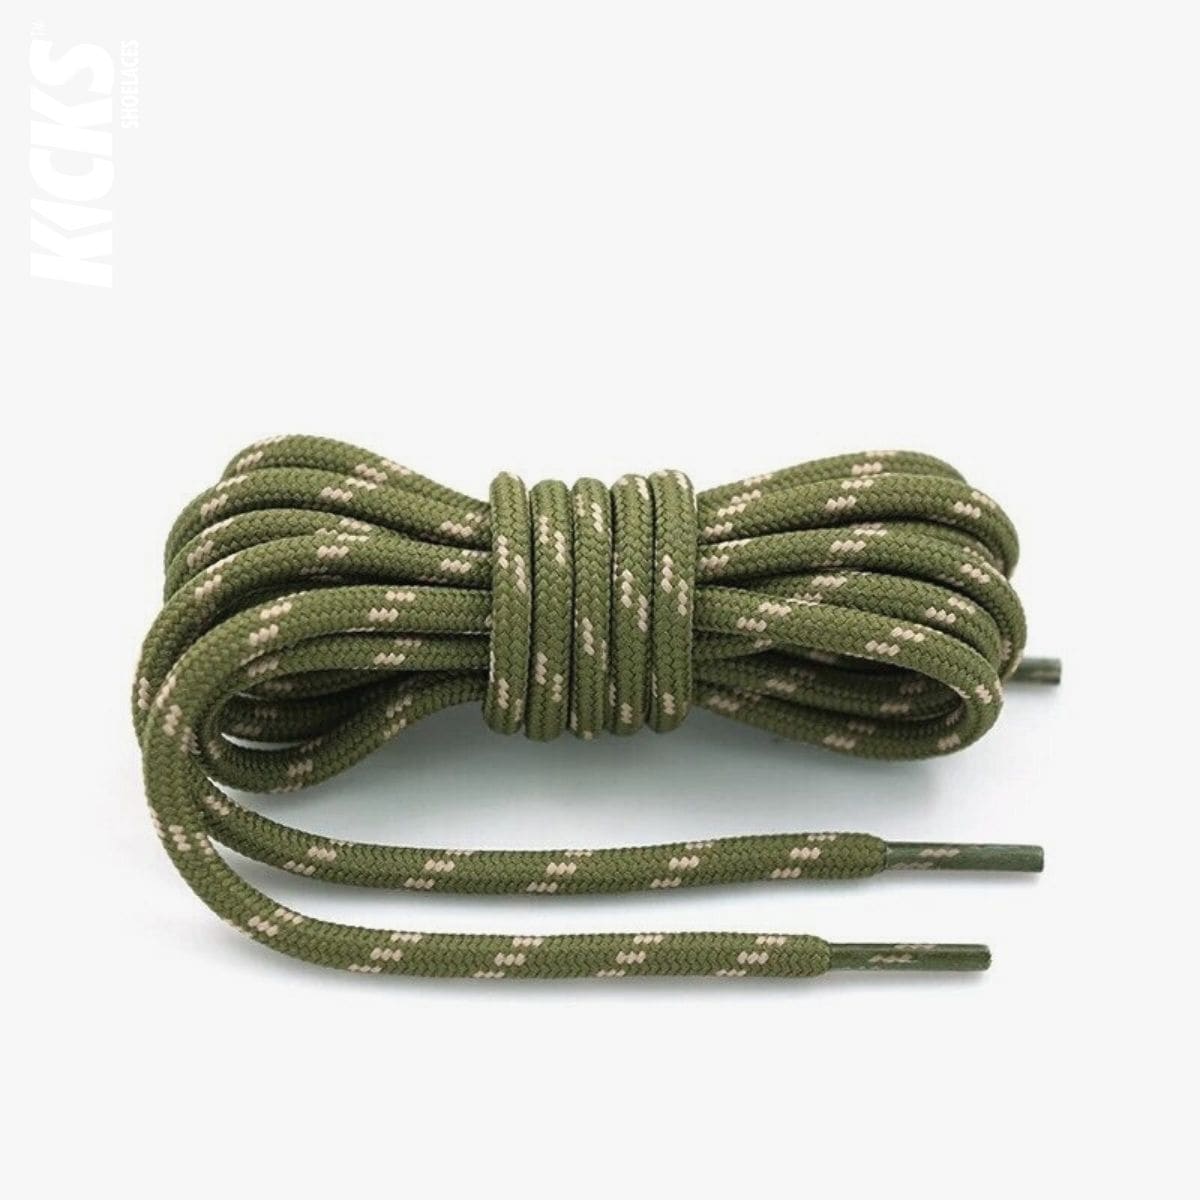 trekking-shoe-laces-united-states-in-army-green-and-khaki-shop-online